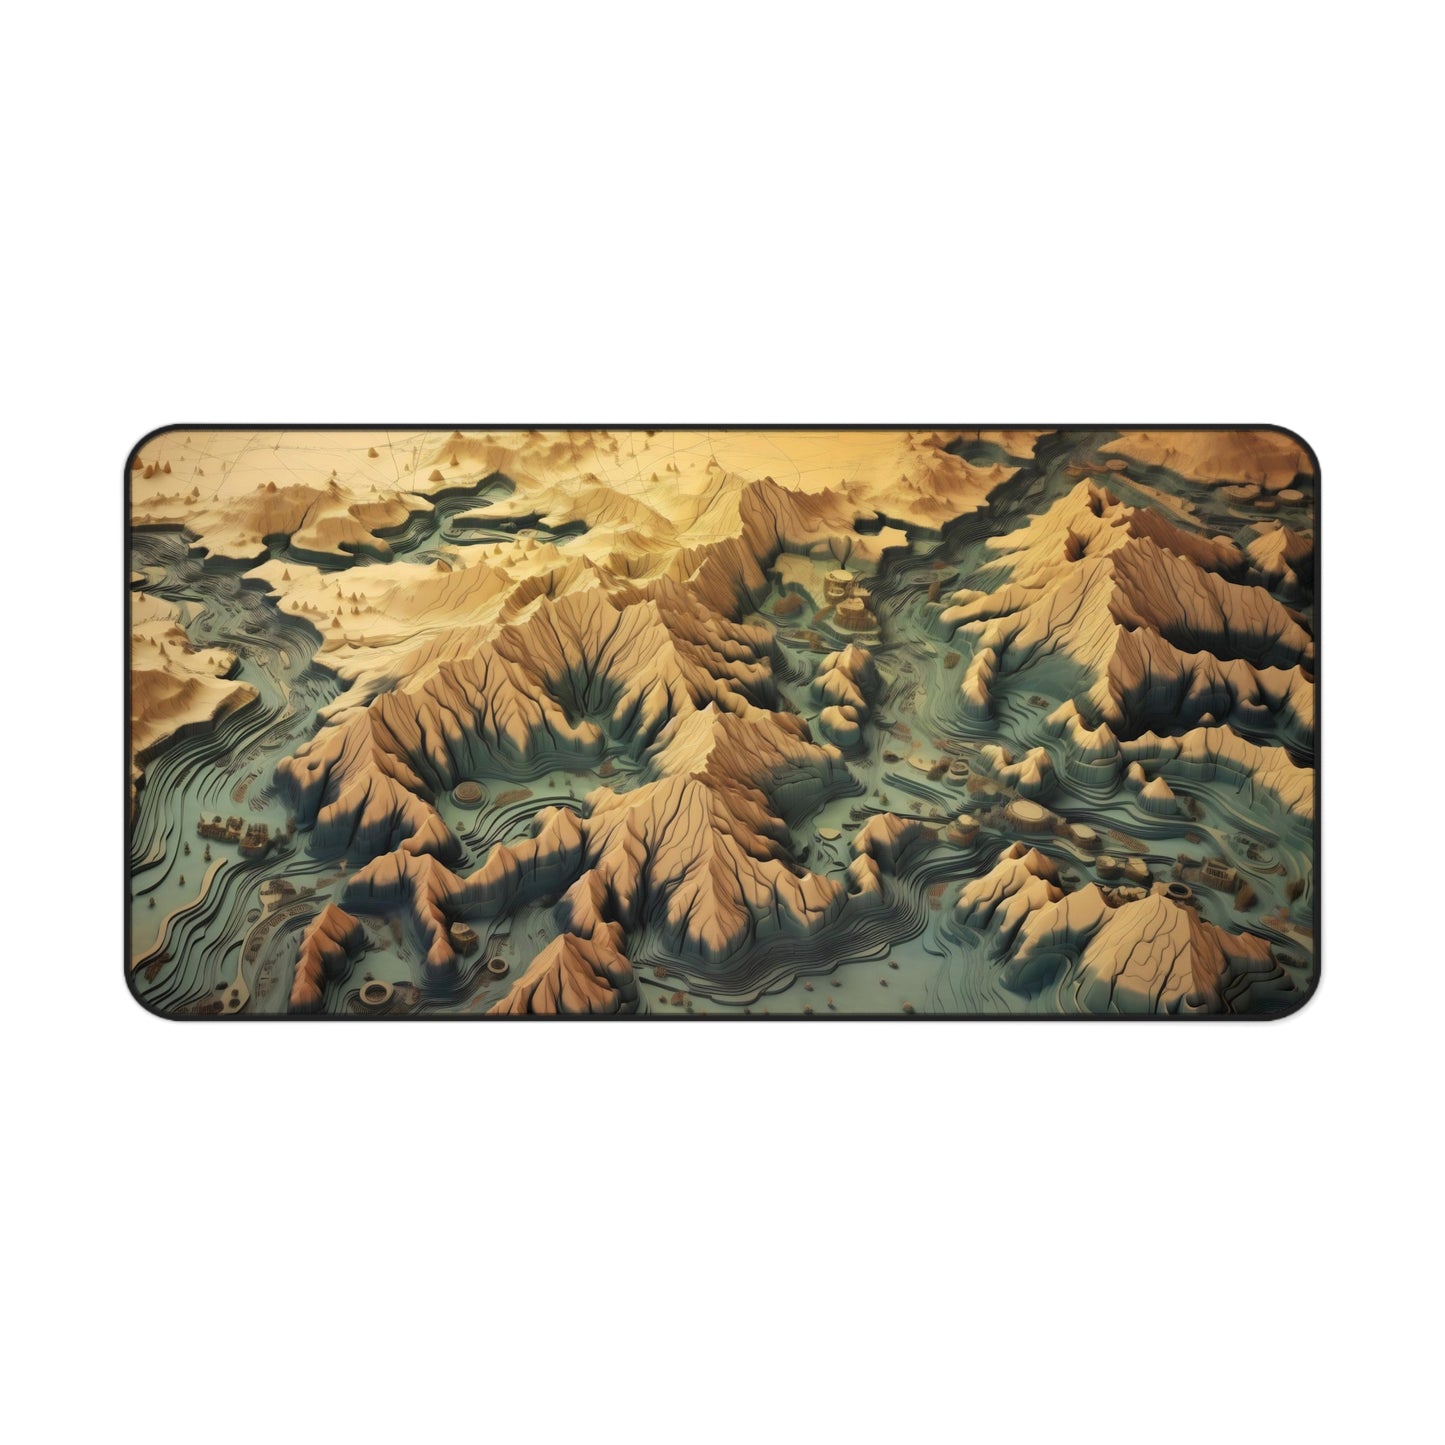 Game Map Desk Mat, 3D Fantasy Map Desk Pad, Topographic Desk Mat, Extra Large Mouse Pad, Gaming Keyboard Mat, Desk Accessory